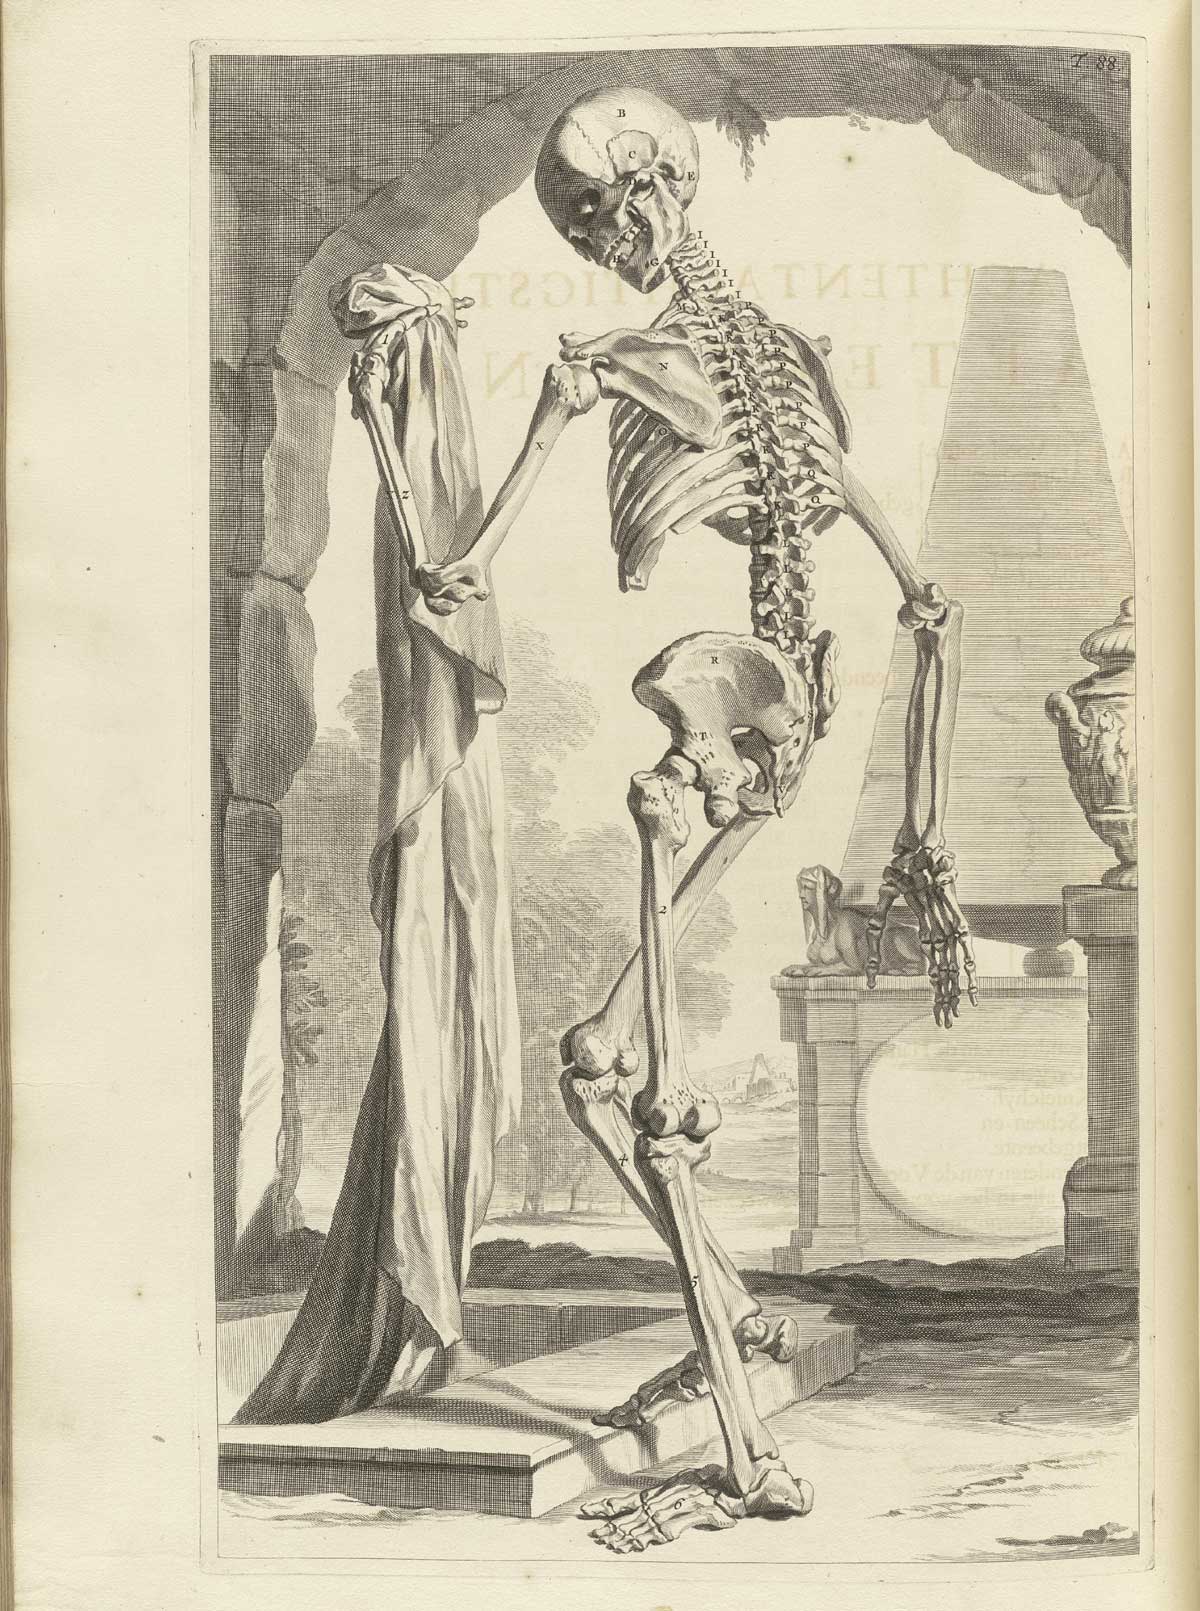 Engraving of a “memento mori” scene of a standing skeleton with its back to the viewer holding a slowing shroud in his left hand up in the air as it tumbles into a crypt from which he is emerging or descending; Classical ruins are shown in the background including an urn and what may be a temple; from Govard Bidloo’s Ontleding Des Menschelyken Lichaams, Amsterdam, 1690, NLM Call no. WZ 250 B5855anDu 1690.